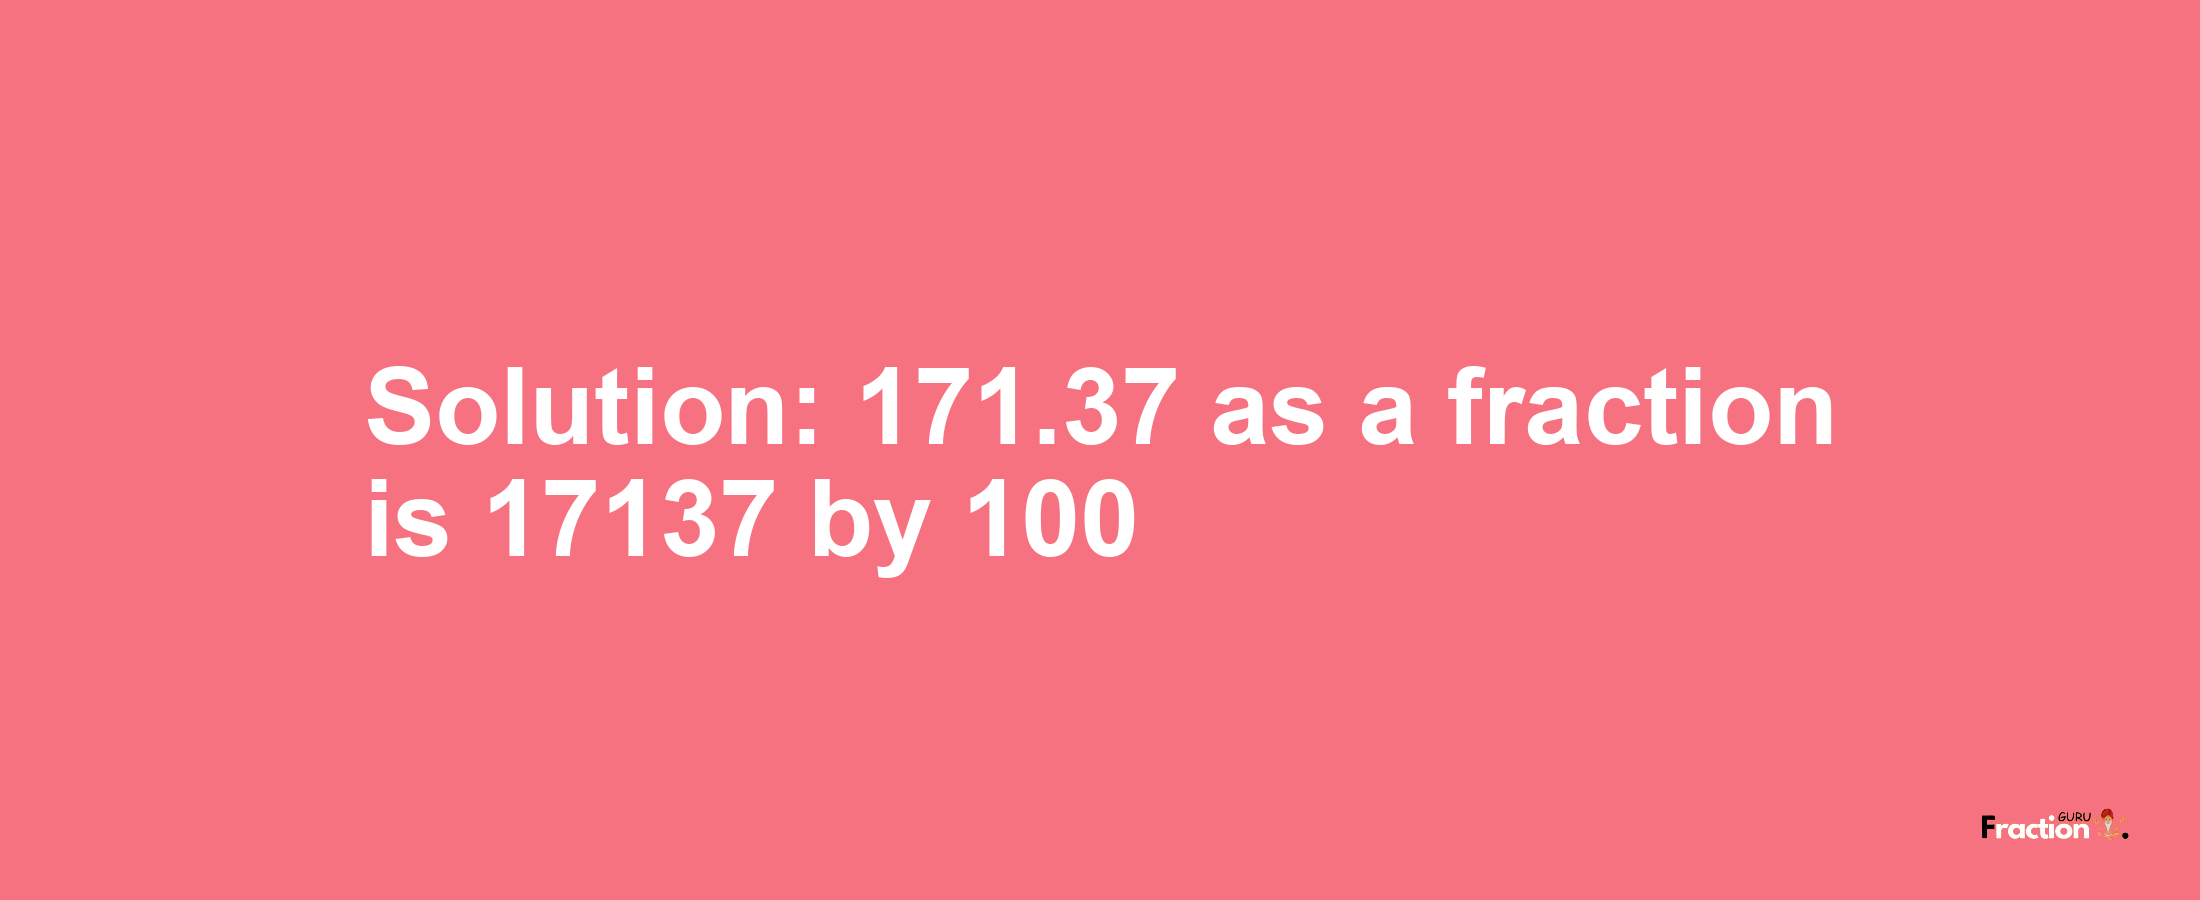 Solution:171.37 as a fraction is 17137/100